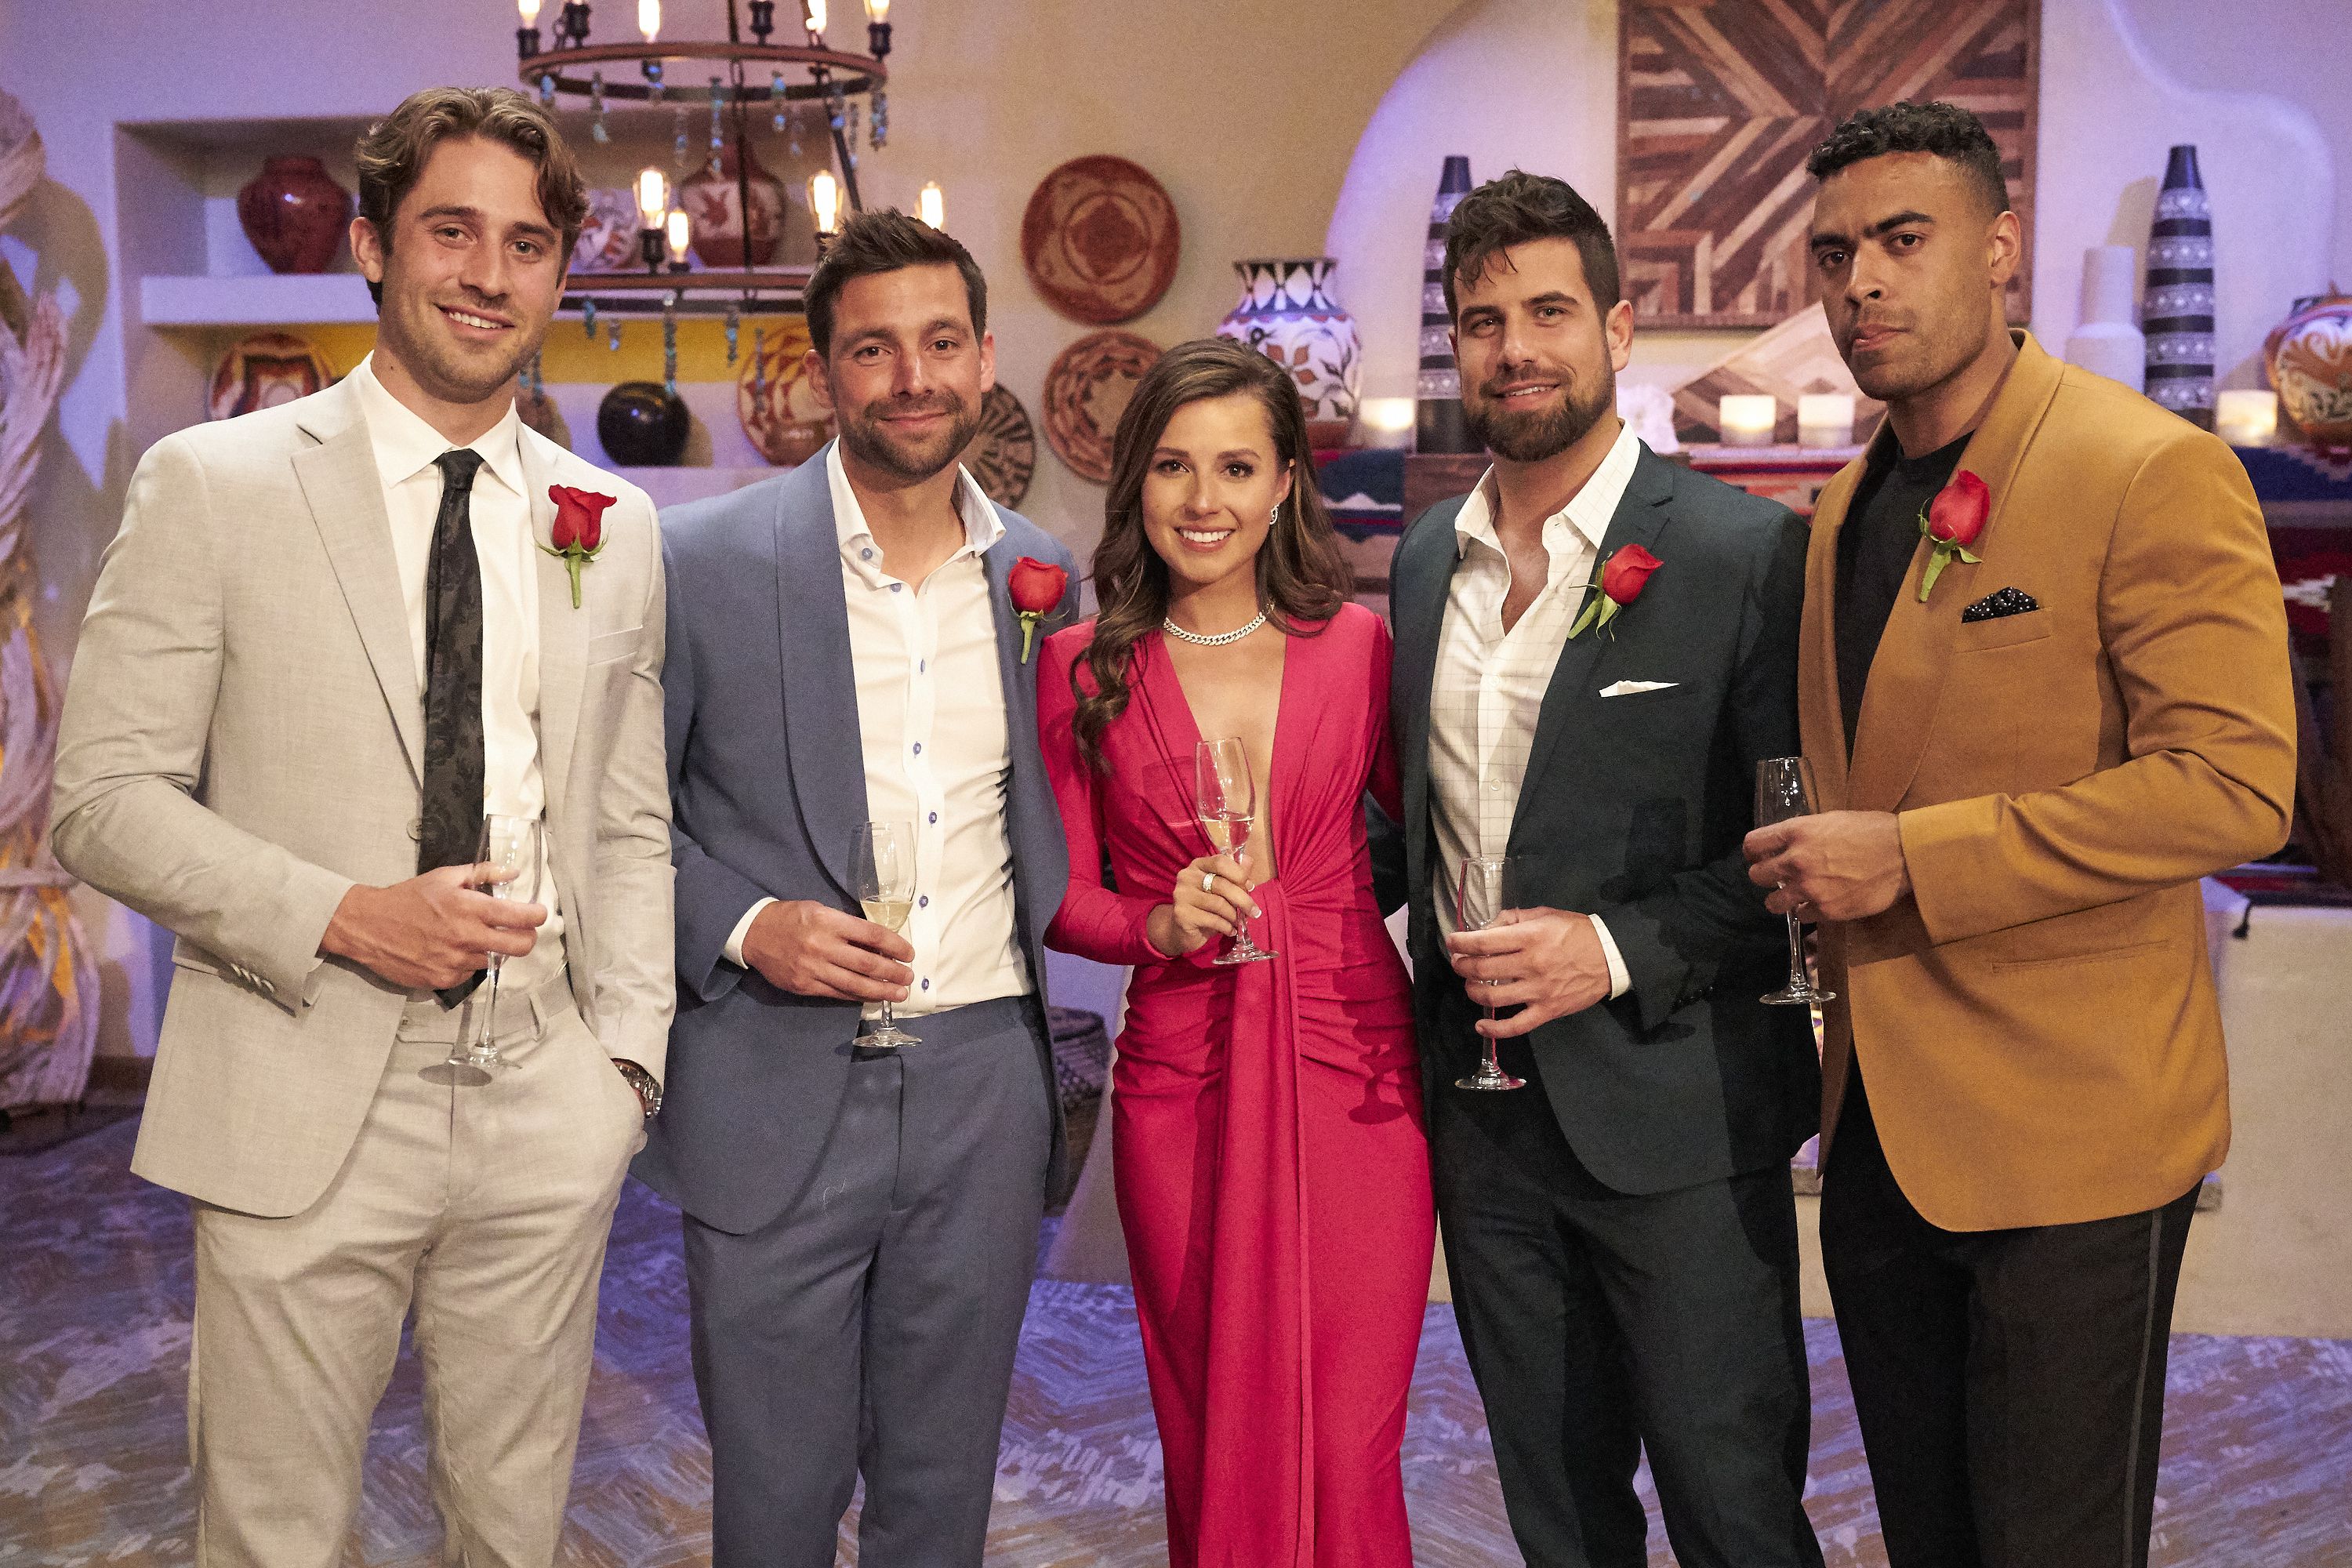 Why Michael Allio Quit Katie Thurstons Bachelorette, With Twitter Reactions